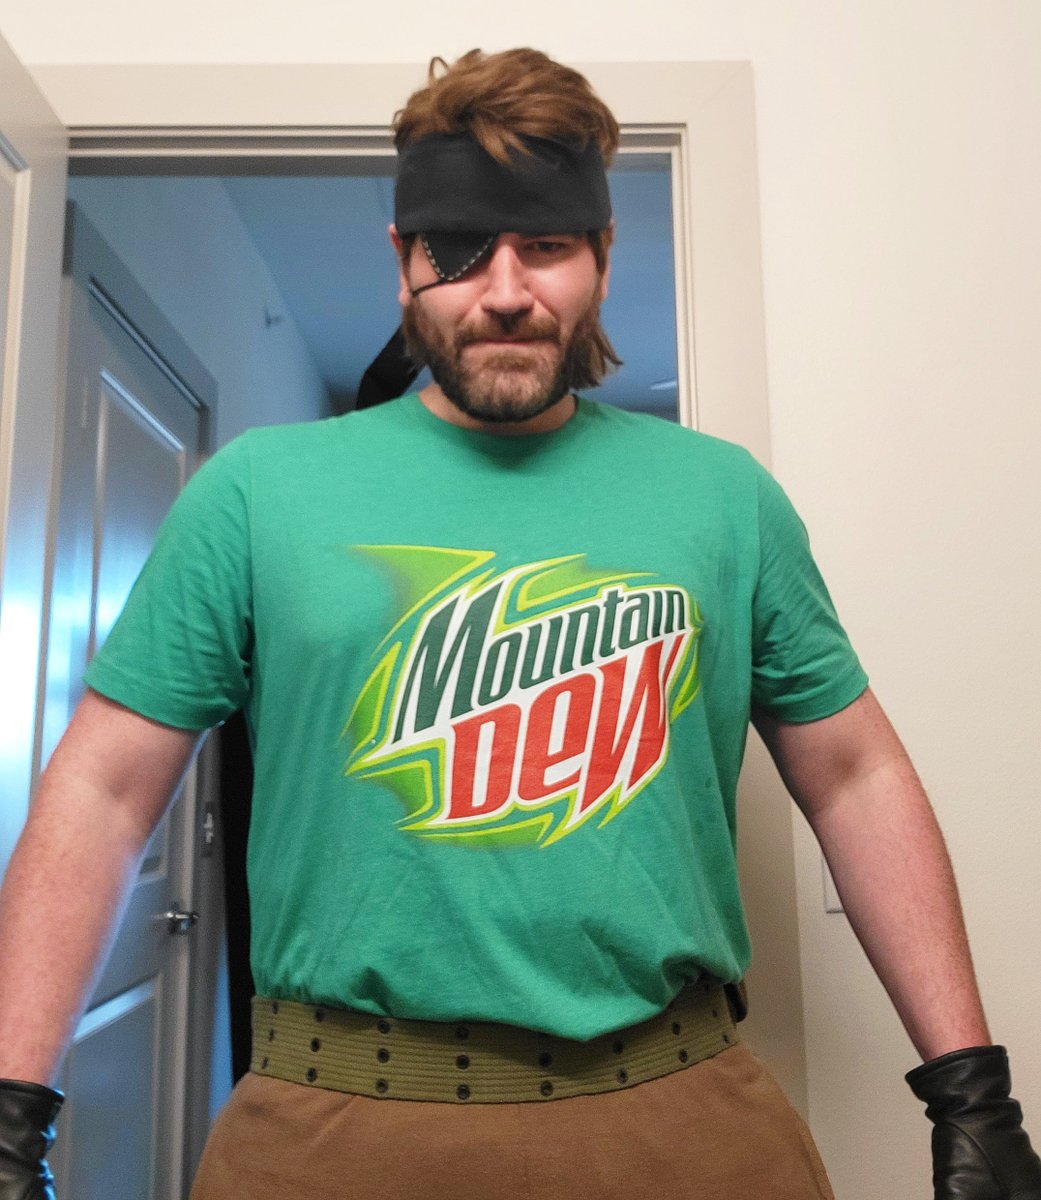 Got my cosplay picked out for @MGSCON next year. #metalgear #dothedew